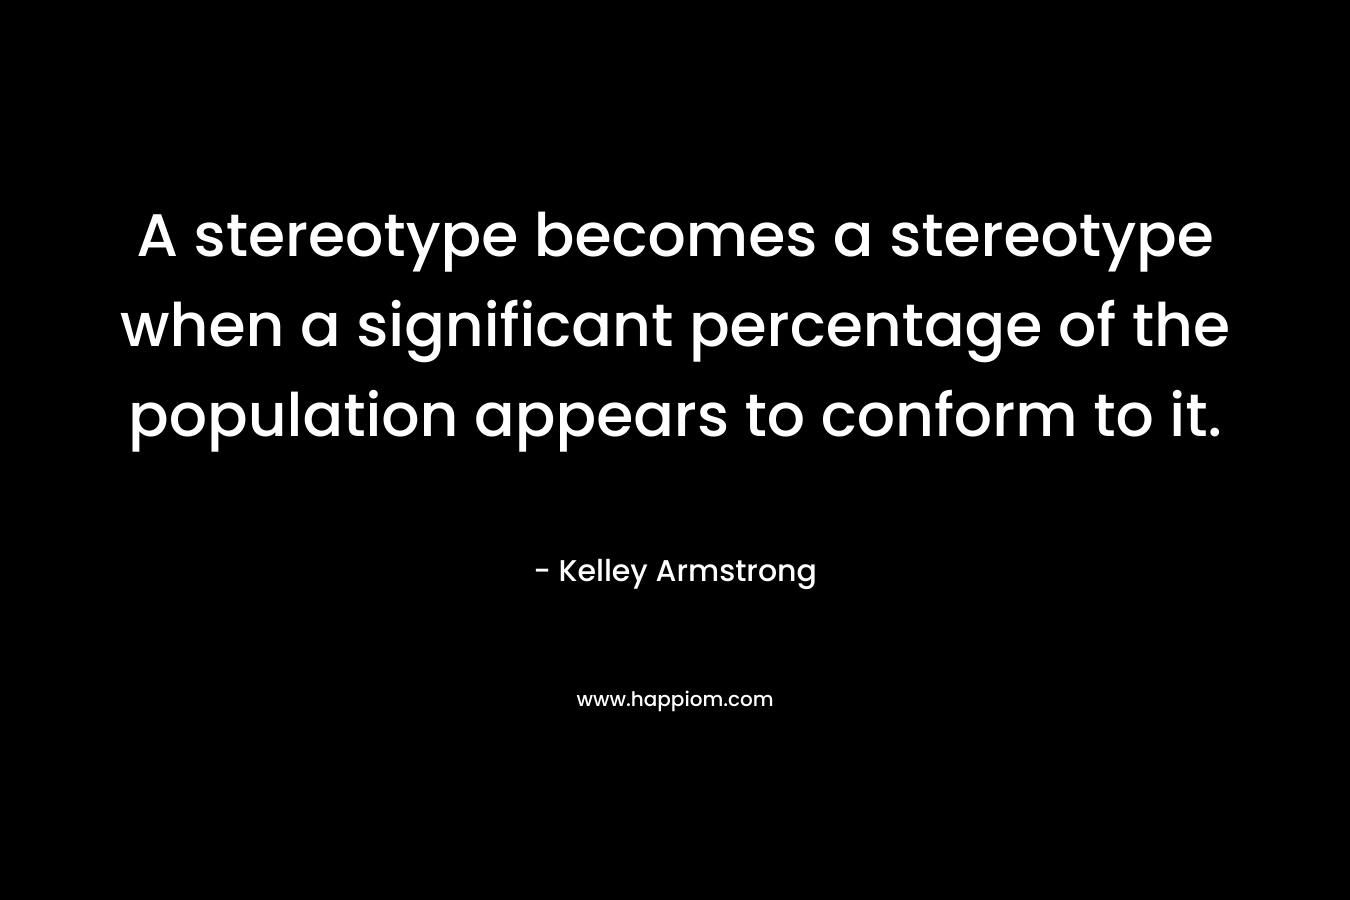 A stereotype becomes a stereotype when a significant percentage of the population appears to conform to it.